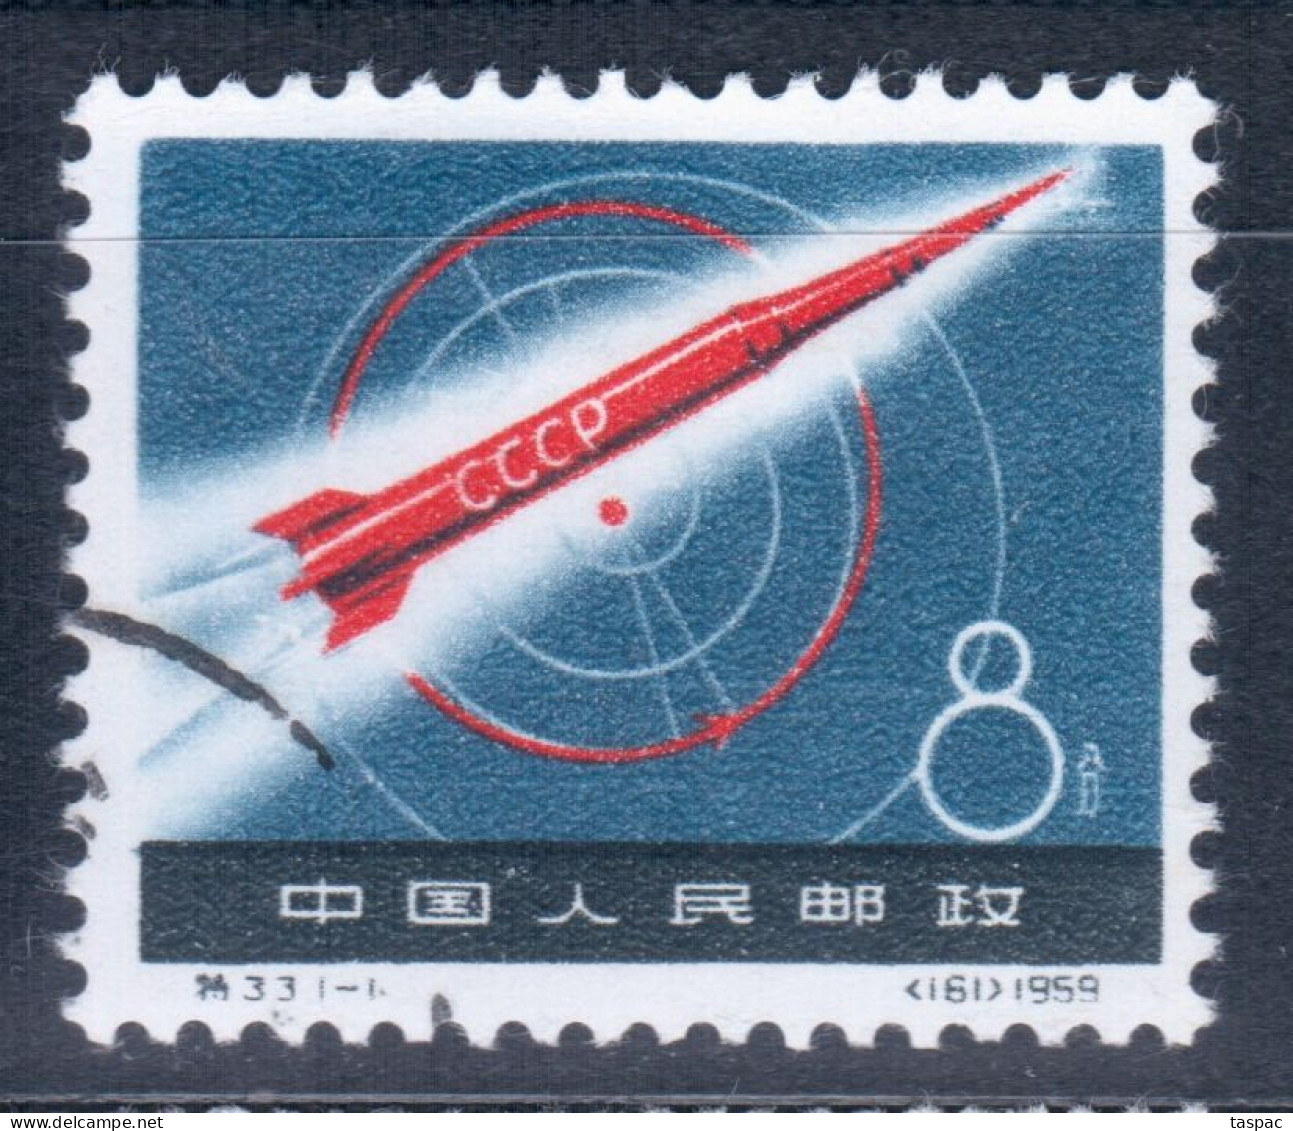 China P.R. 1959 Mi# 453 Used - Launching Of First Russian Space Rocket - Usados